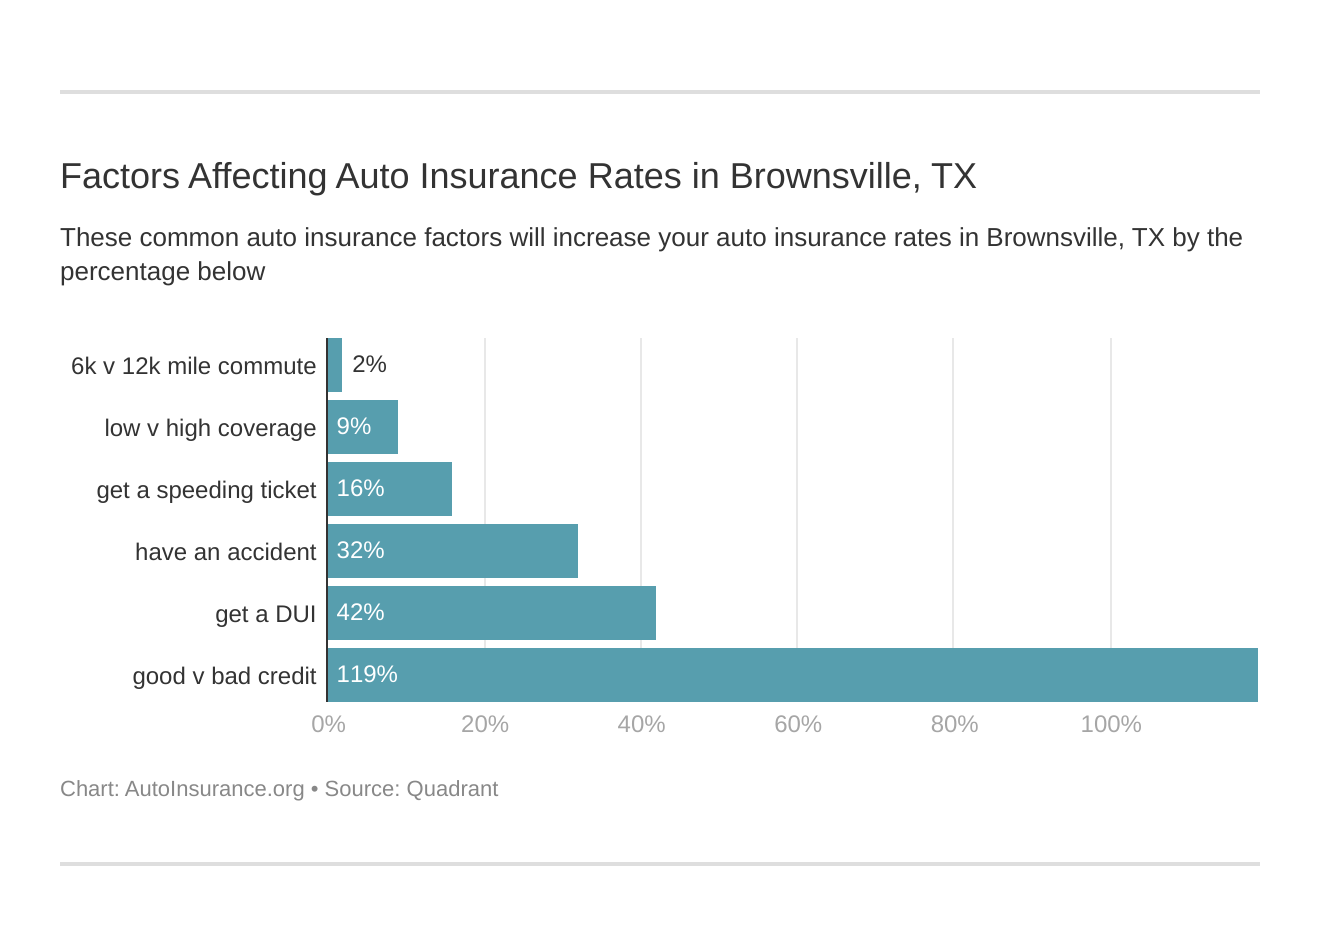 Factors Affecting Auto Insurance Rates in Brownsville, TX